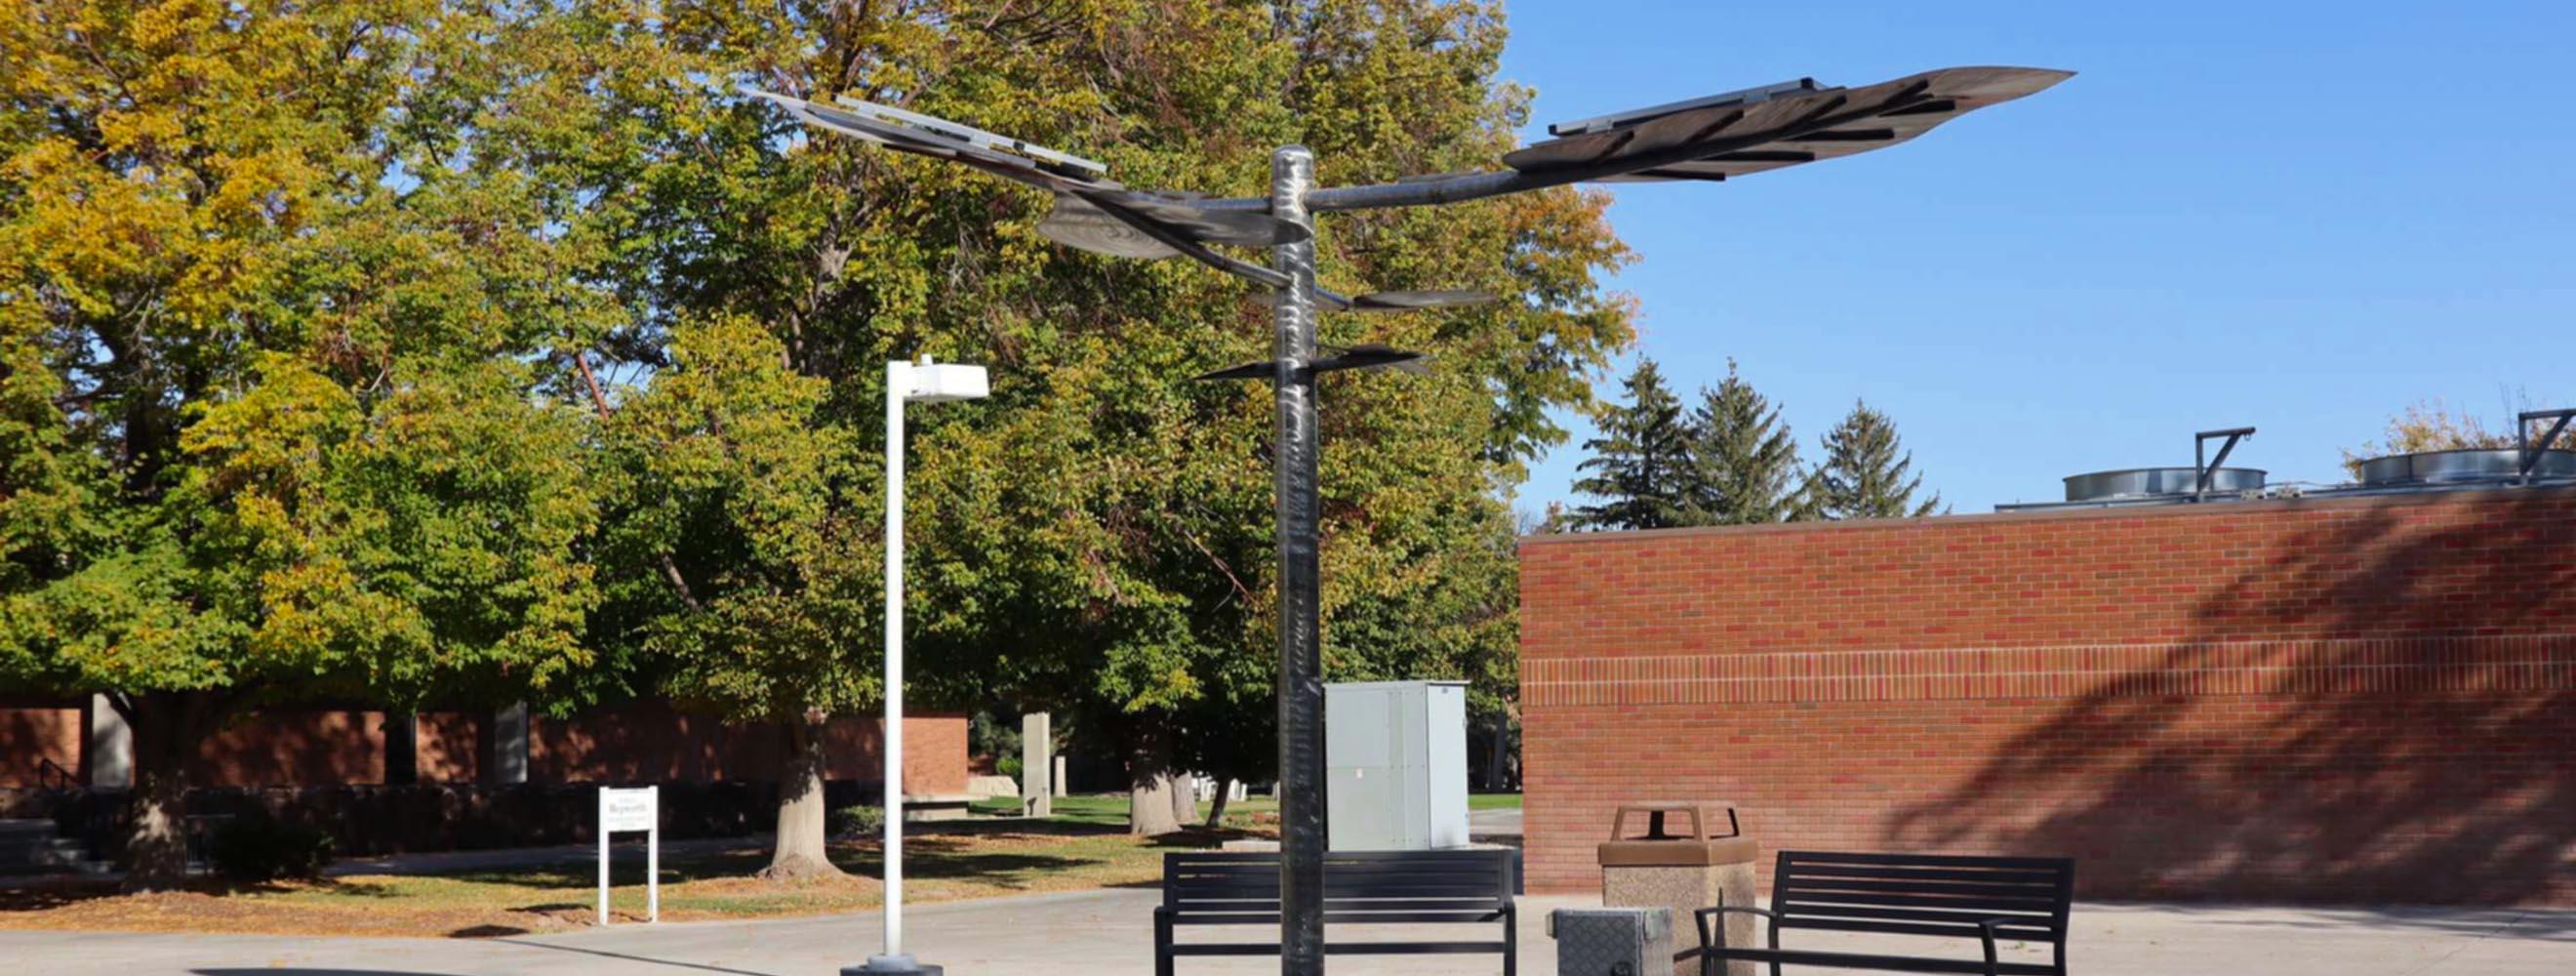 Solar Charging Tree made of metal and charges student devices.